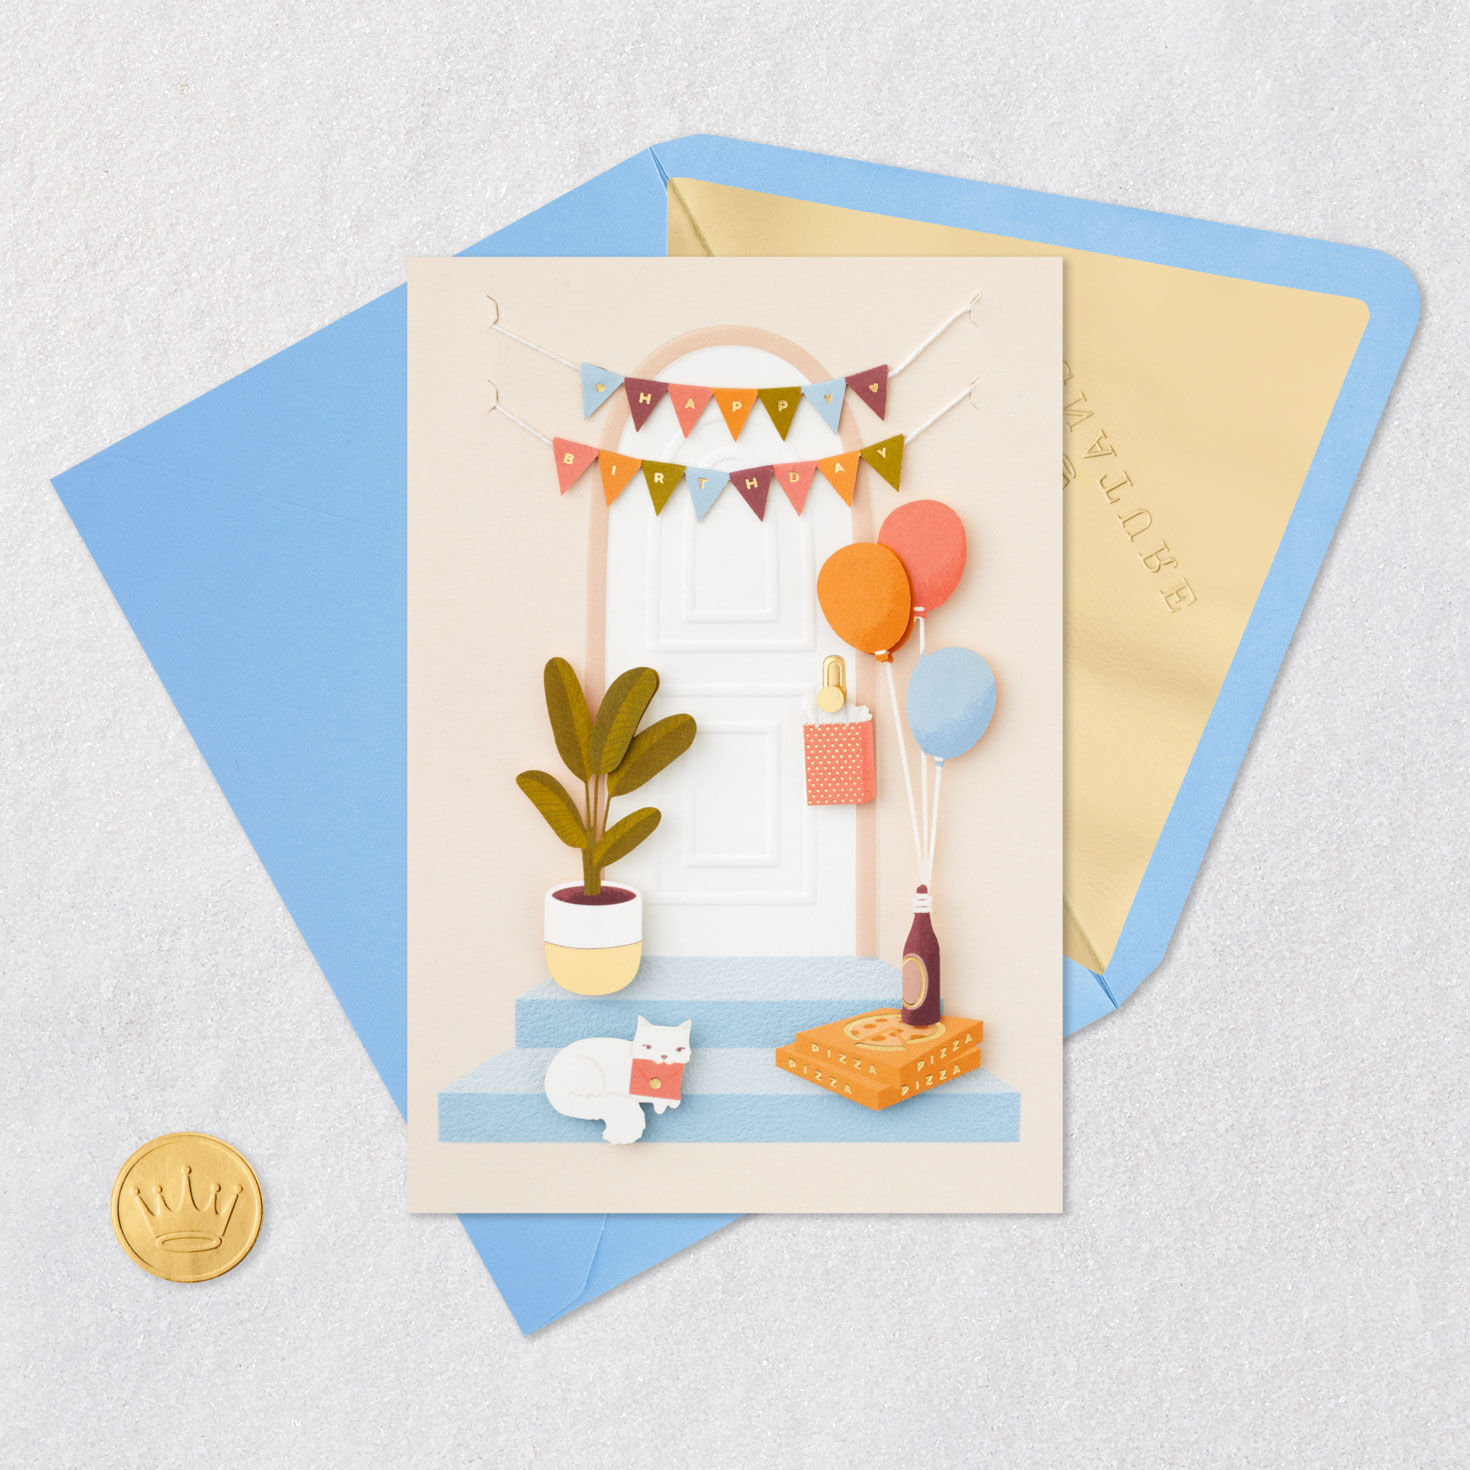 Special Delivery Birthday Card for only USD 8.59 | Hallmark